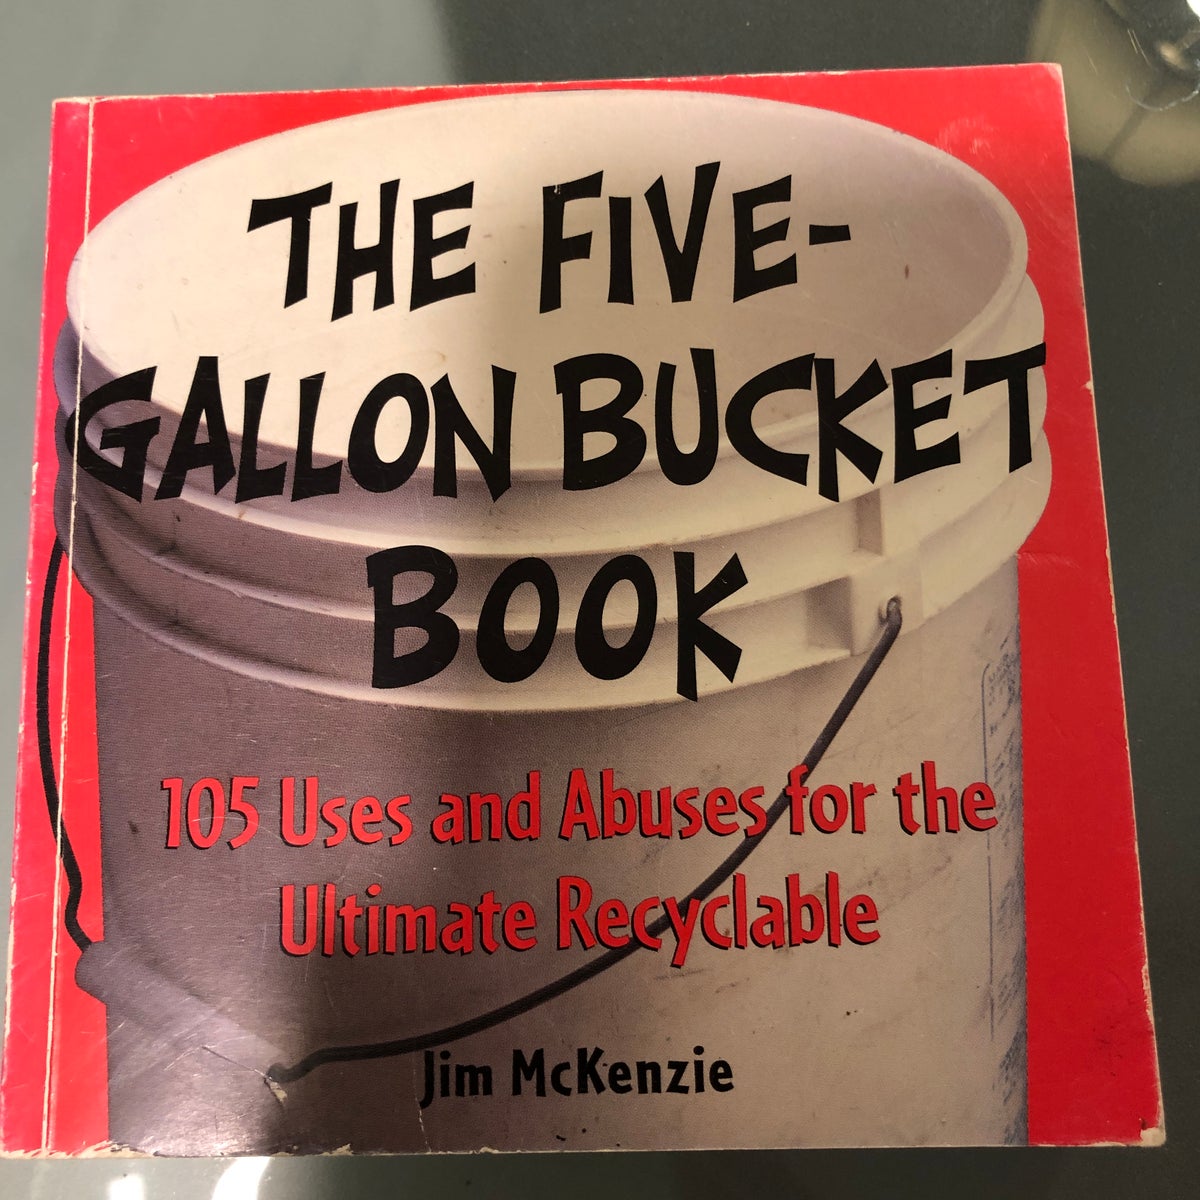 The Five-Gallon Bucket Book by Jim McKenzie, Paperback